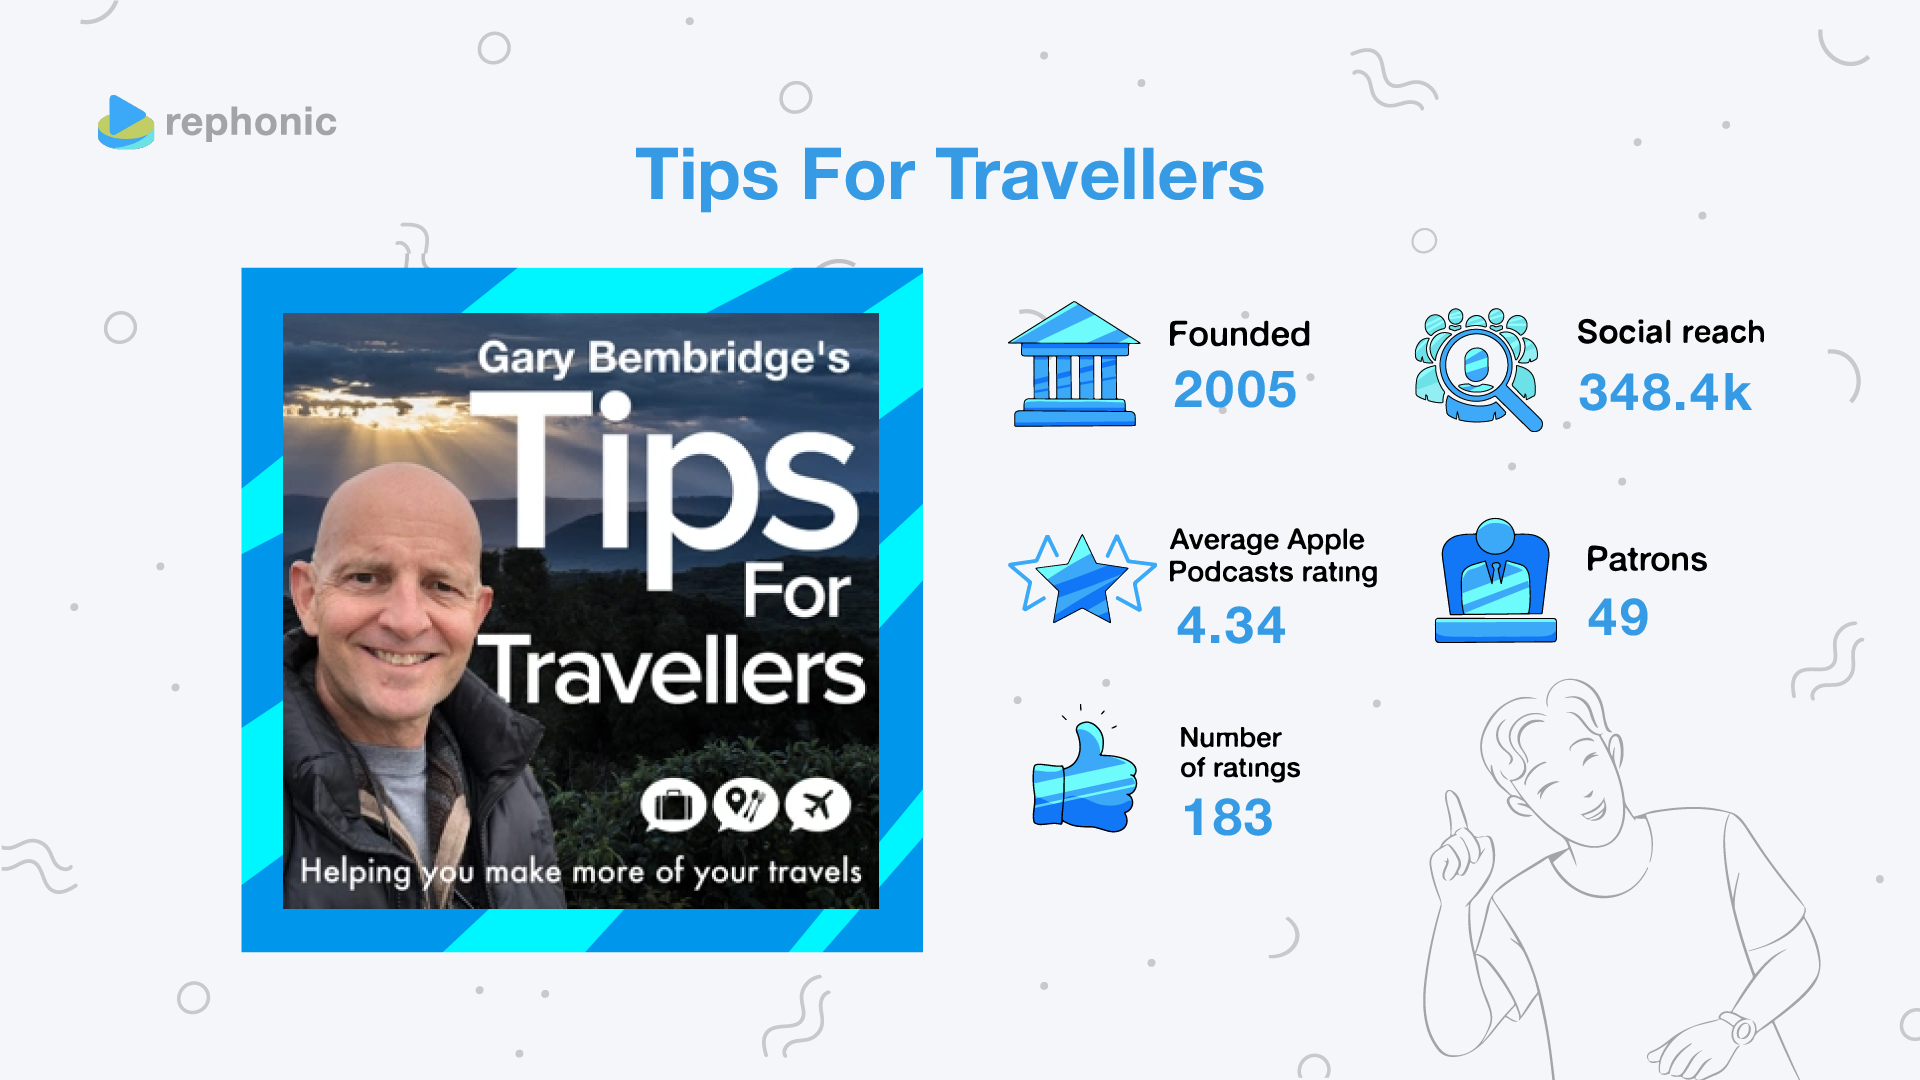 Tips For Travellers podcast stats on Rephonic